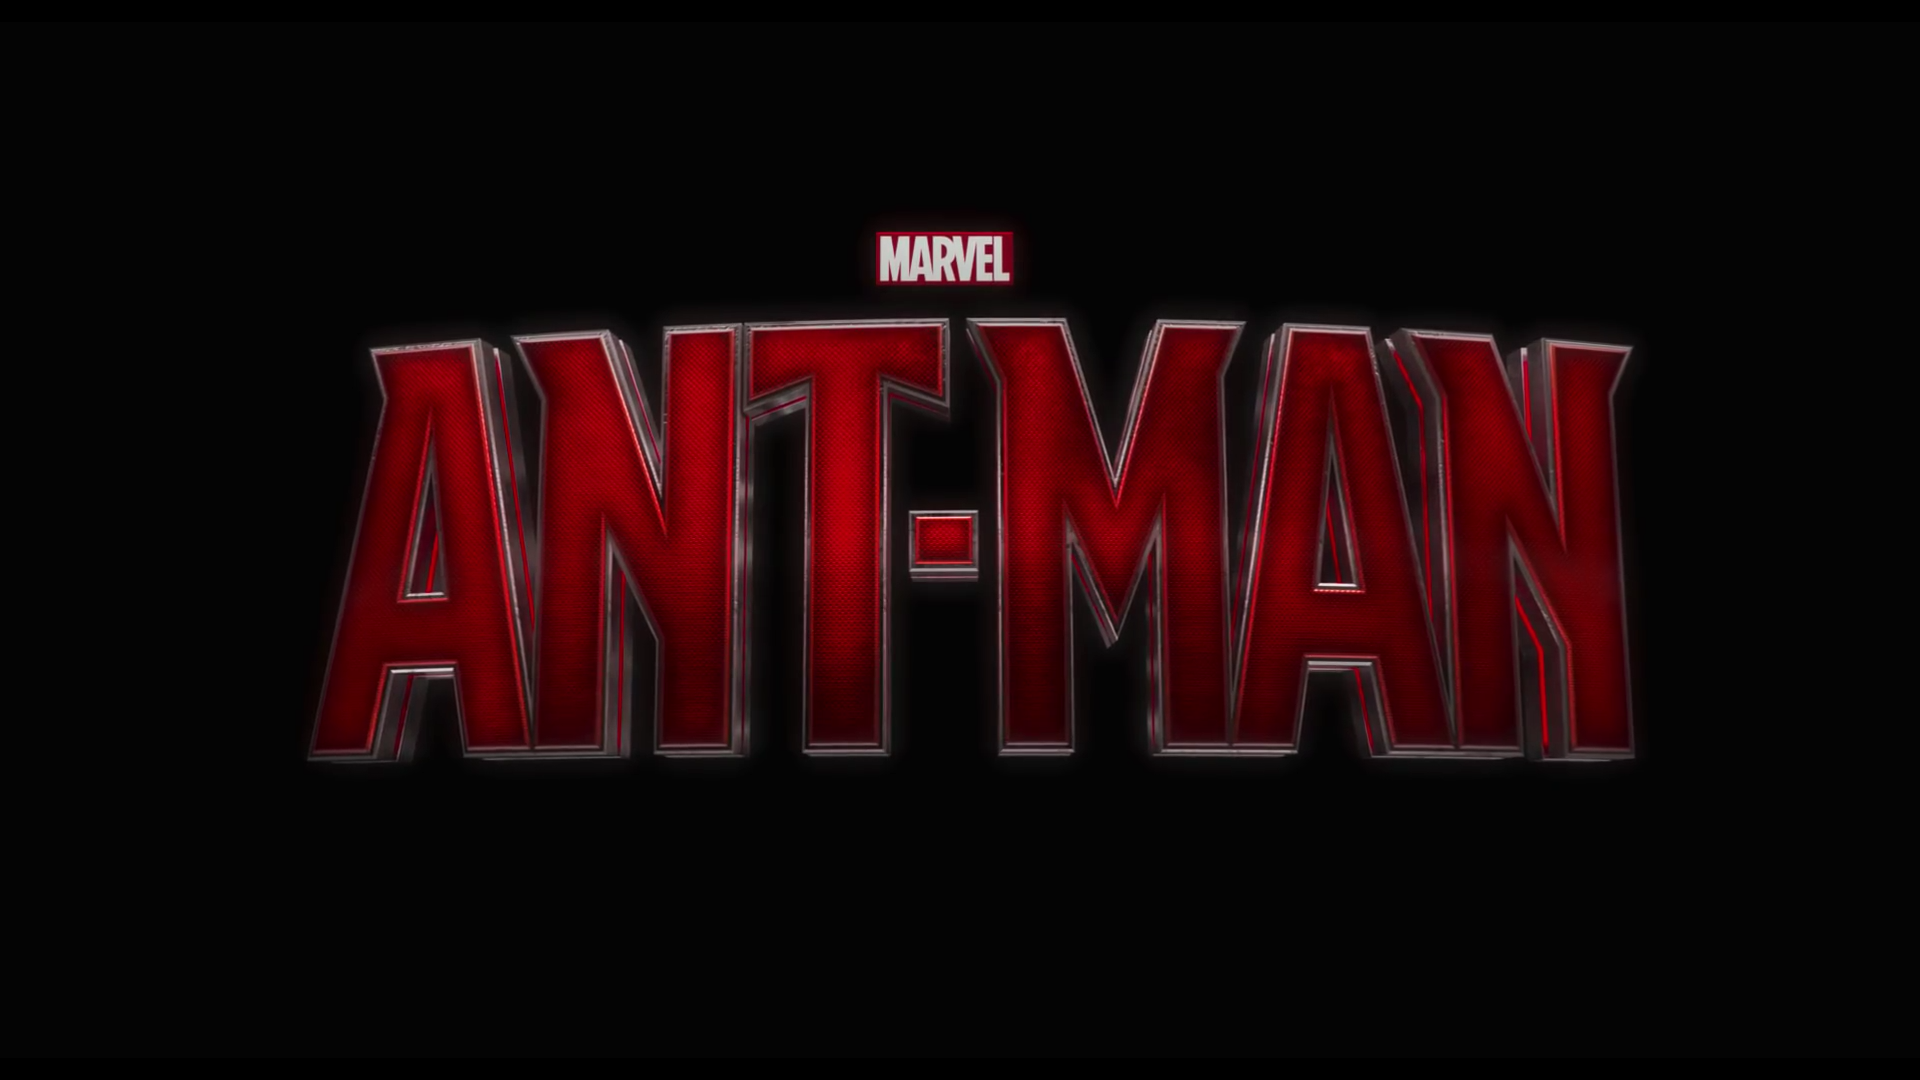 Ant-Man by Charvey